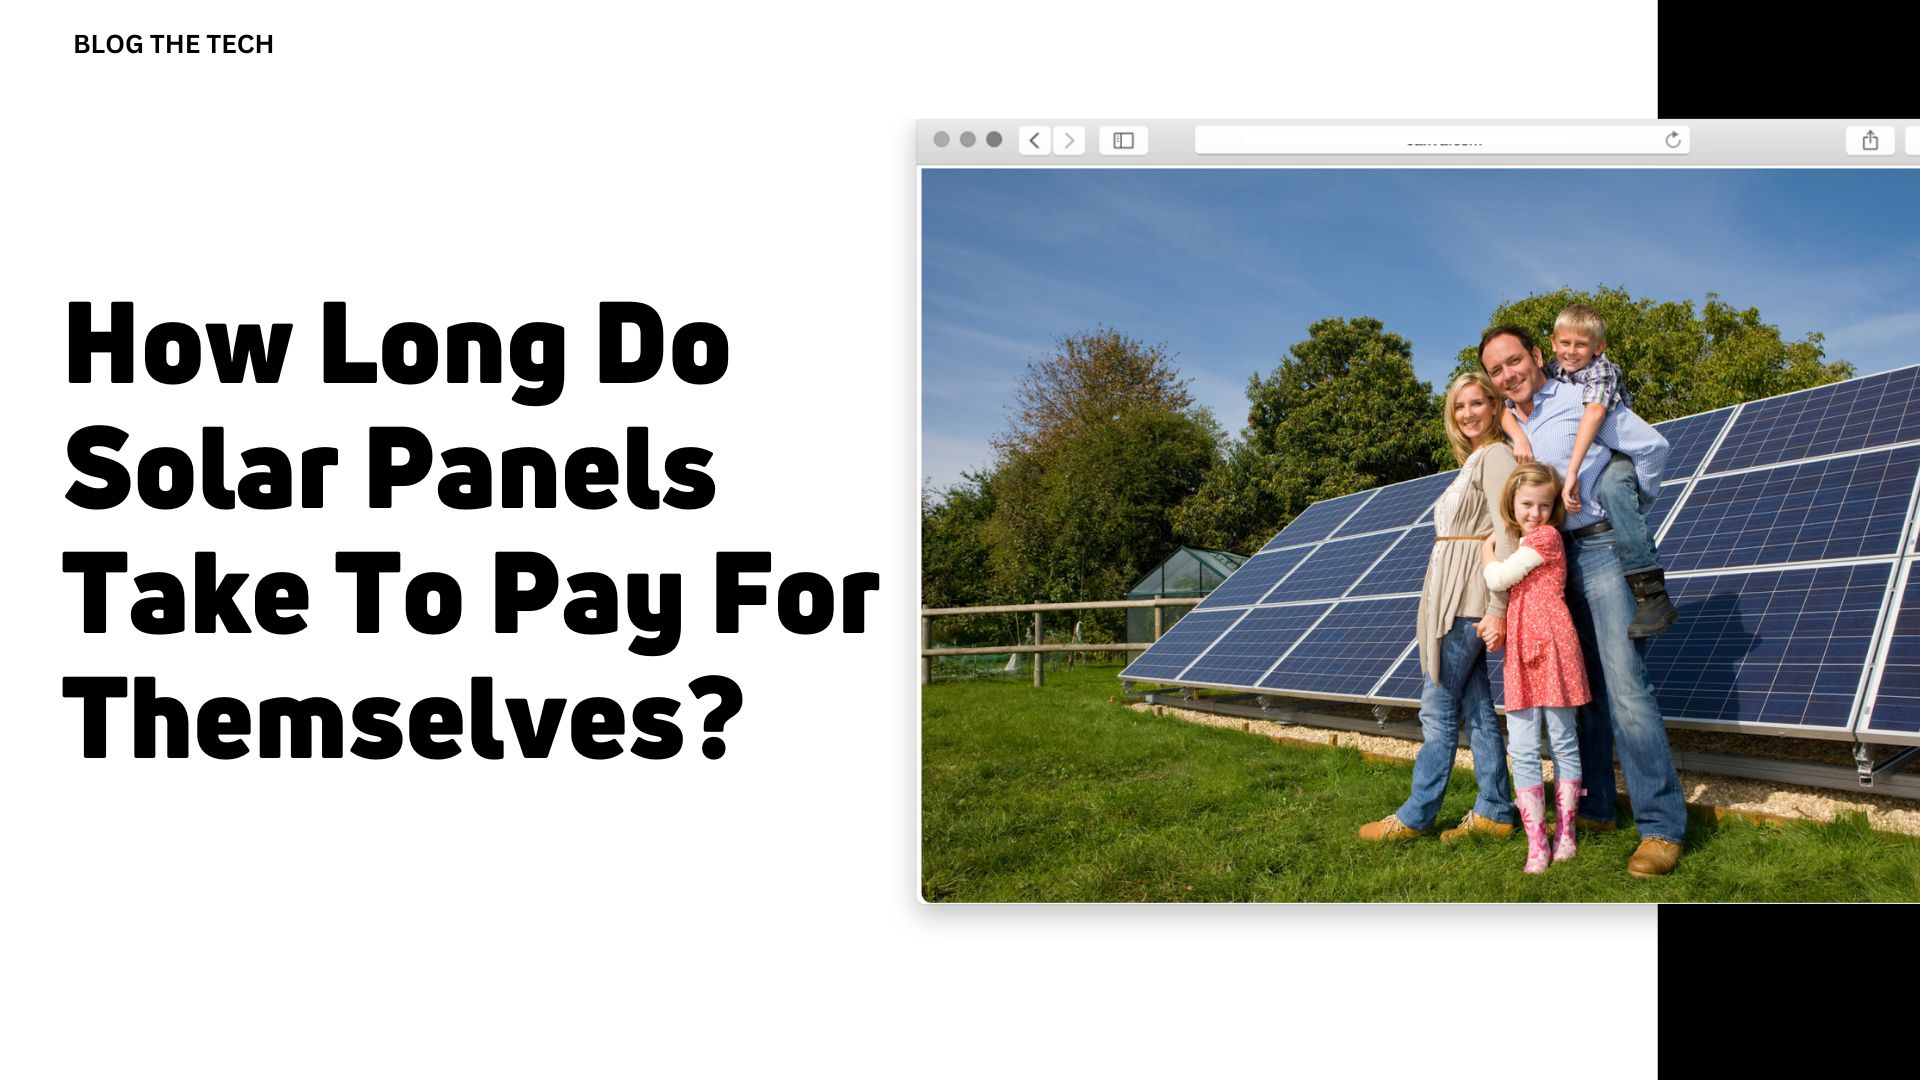 How Long Do Solar Panels Take To Pay For Themselves?